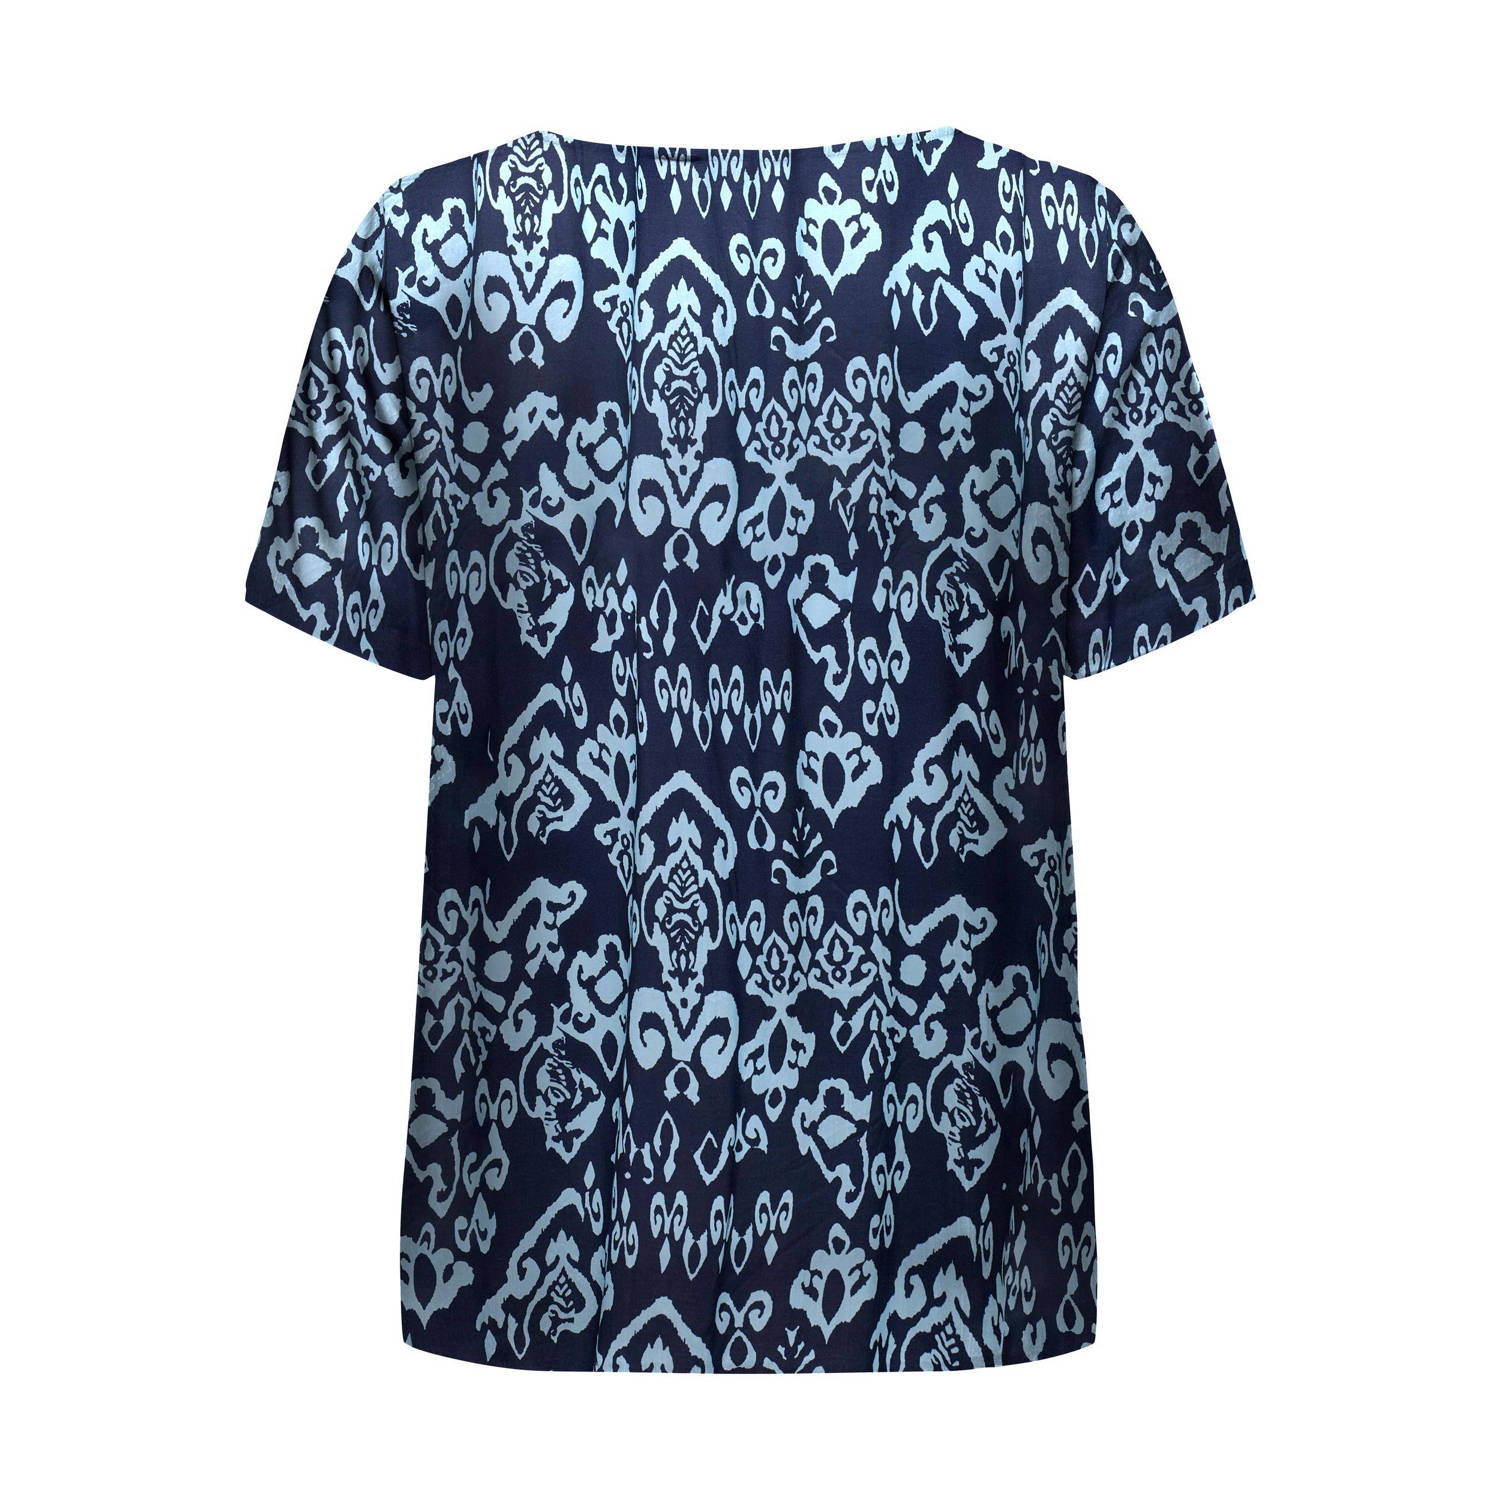 ONLY CARMAKOMA blousetop CARMARRAKESH met all over print donkerblauw lichtblauw